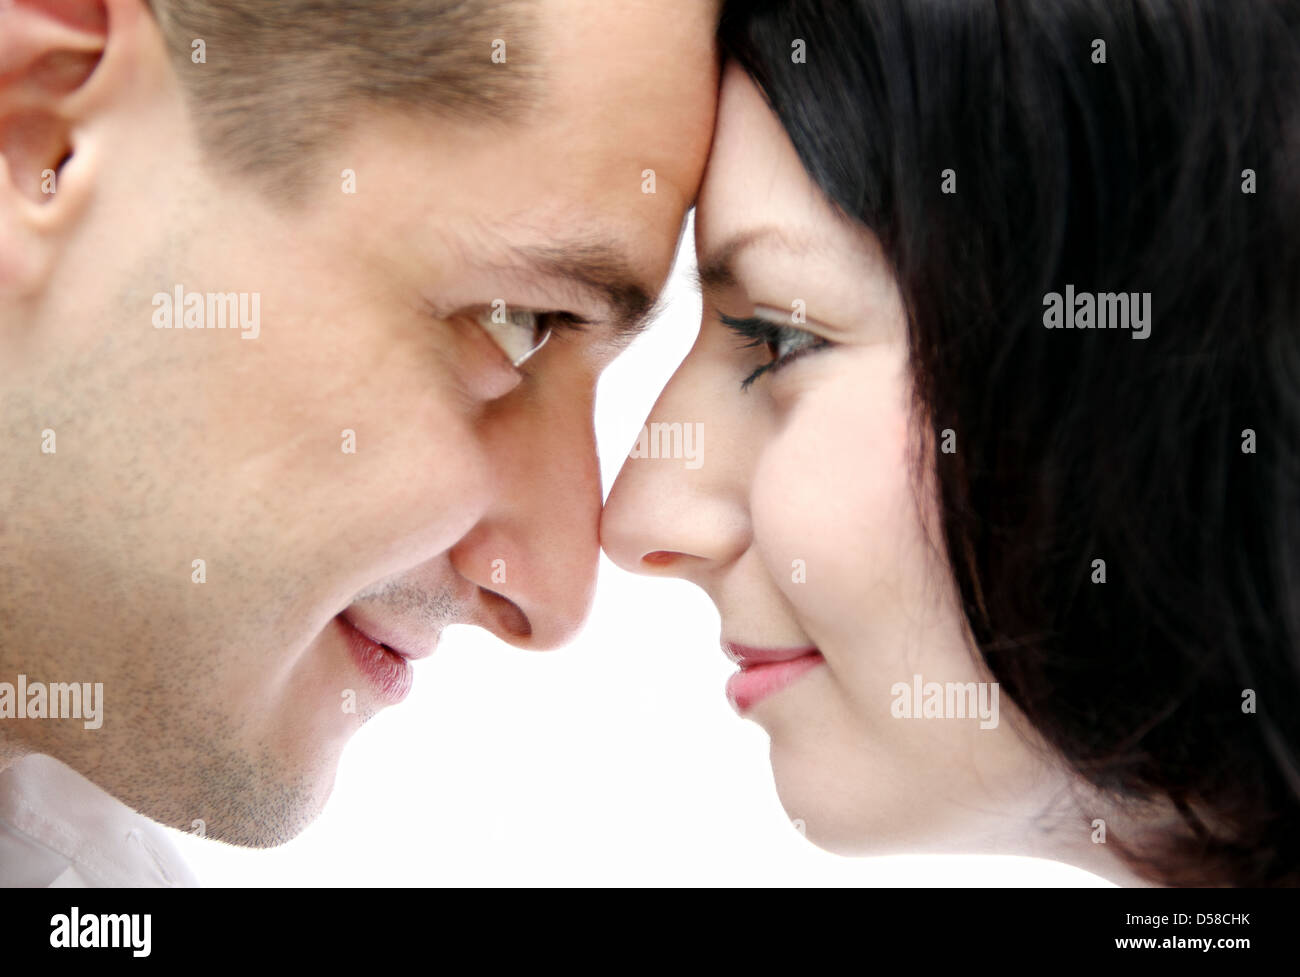 man and woman look at each other Stock Photo